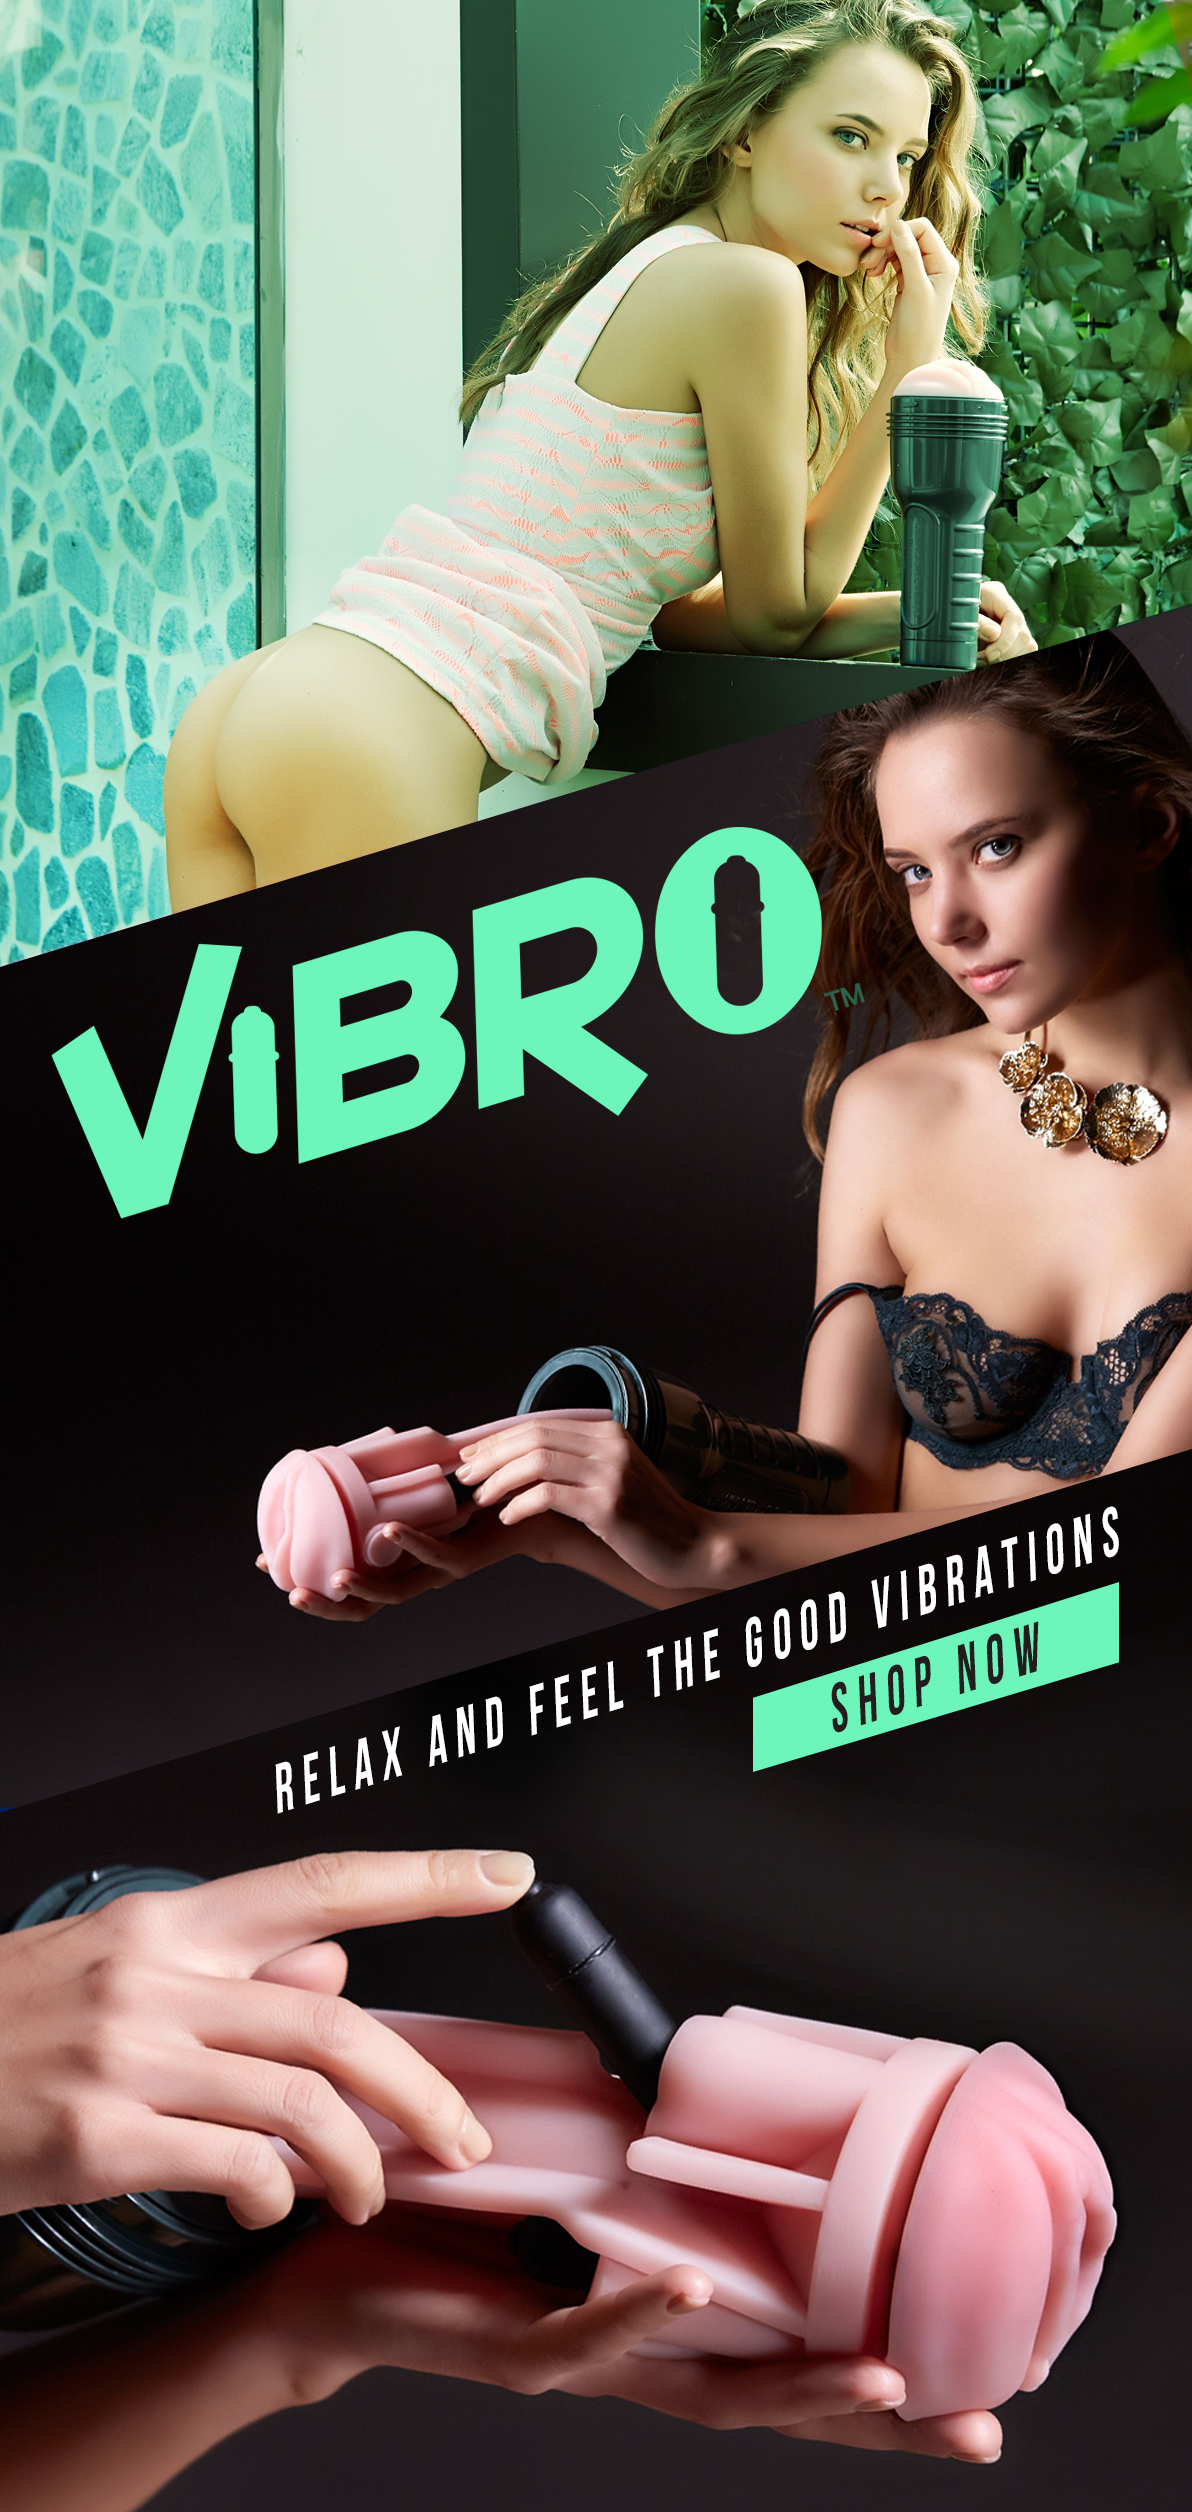 Fleshlight Vibro - Come See What All The Buzz Is About